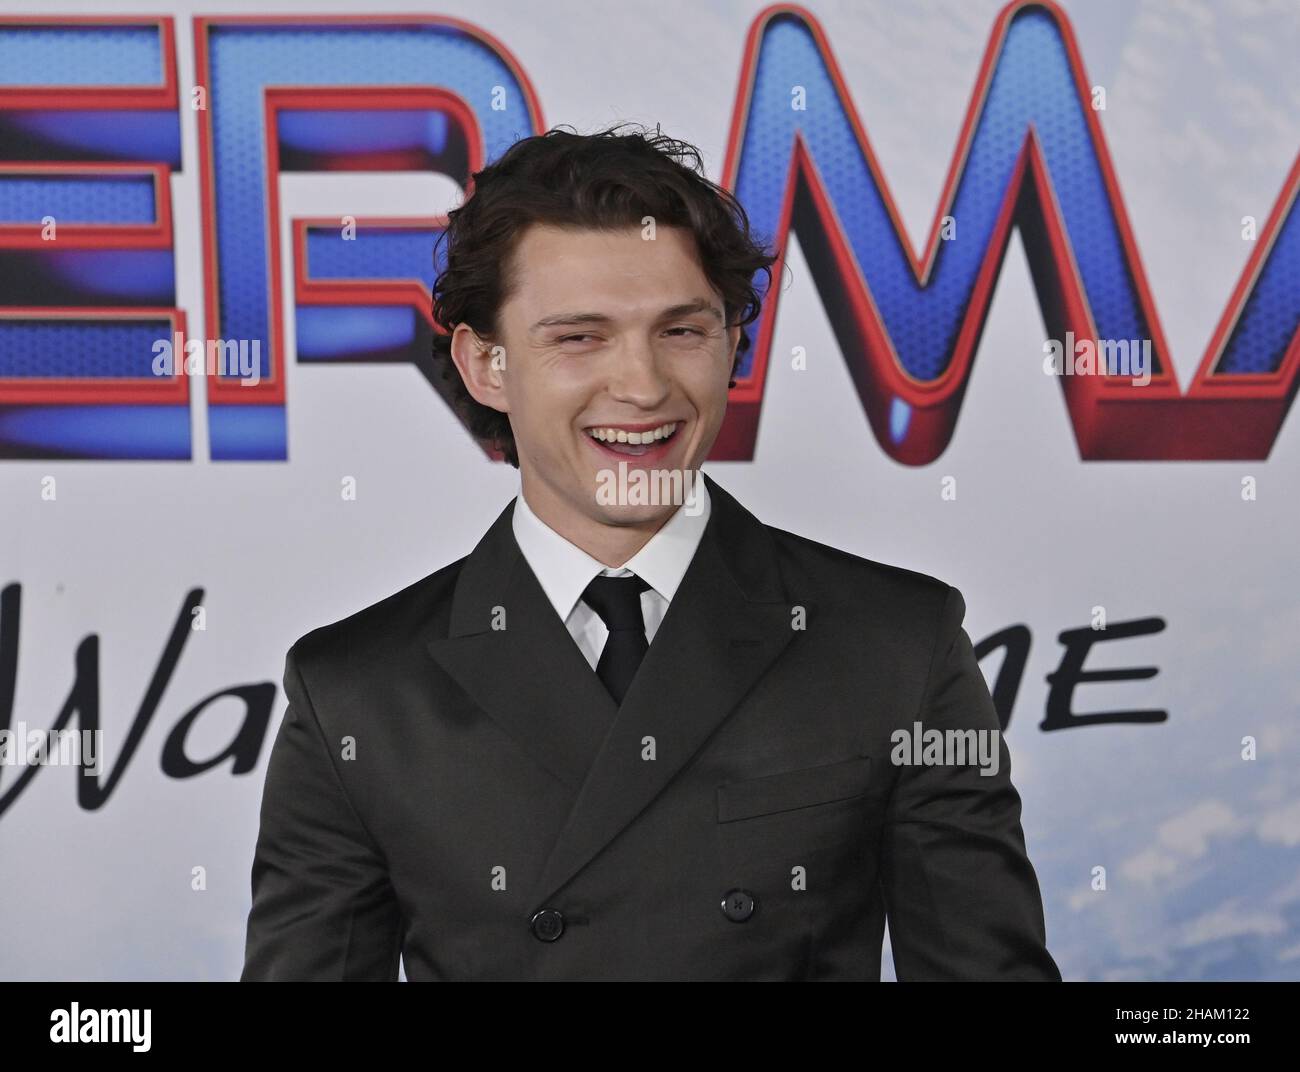 Los Angeles, United States. 14th Dec, 2021. Cast member Tom Holland attends the premiere of the sci-fi motion picture 'Spider-Man: No Way Home' at the Regency Village Theatre in the Westwood section of Los Angeles on Monday, December 13, 2021. Storyline: With Spider-Man's identity now revealed, Peter asks Doctor Strange for help. When a spell goes wrong, dangerous foes from other worlds start to appear, forcing Peter to discover what it truly means to be Spider-Man. Photo by Jim Ruymen/UPI Credit: UPI/Alamy Live News Stock Photo